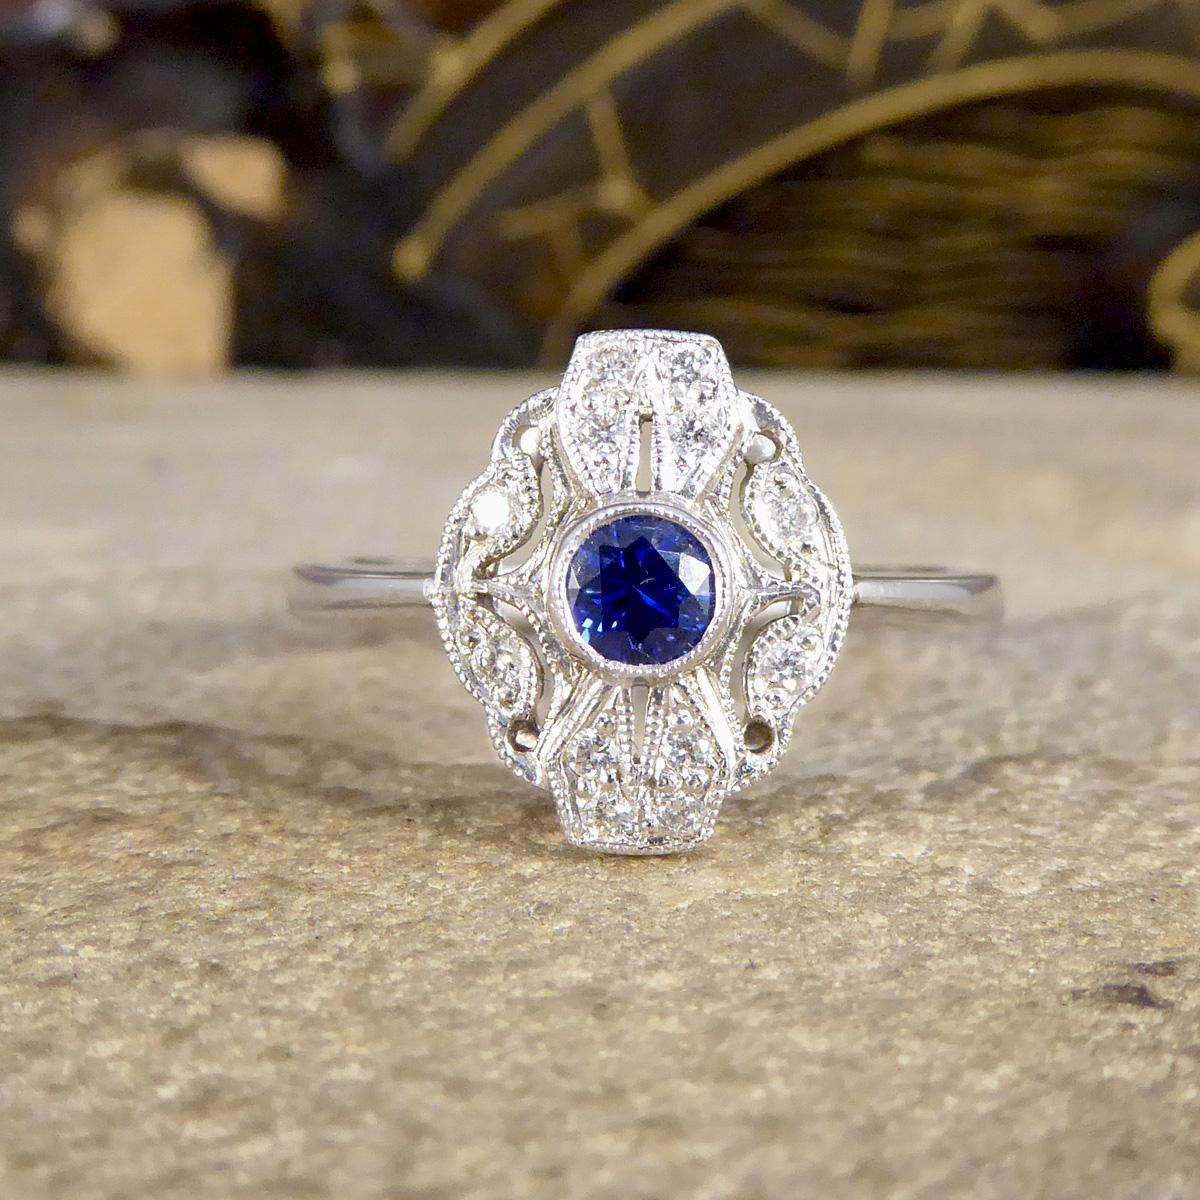 This stunning ring has been hand crafted and is new and never worn. It has been designed and carefully crafted to resemble an Art Deco style ring with a collar set bright Blue Sapphire weighing 0.27ct in the centre with a milgrain edge surrounded by